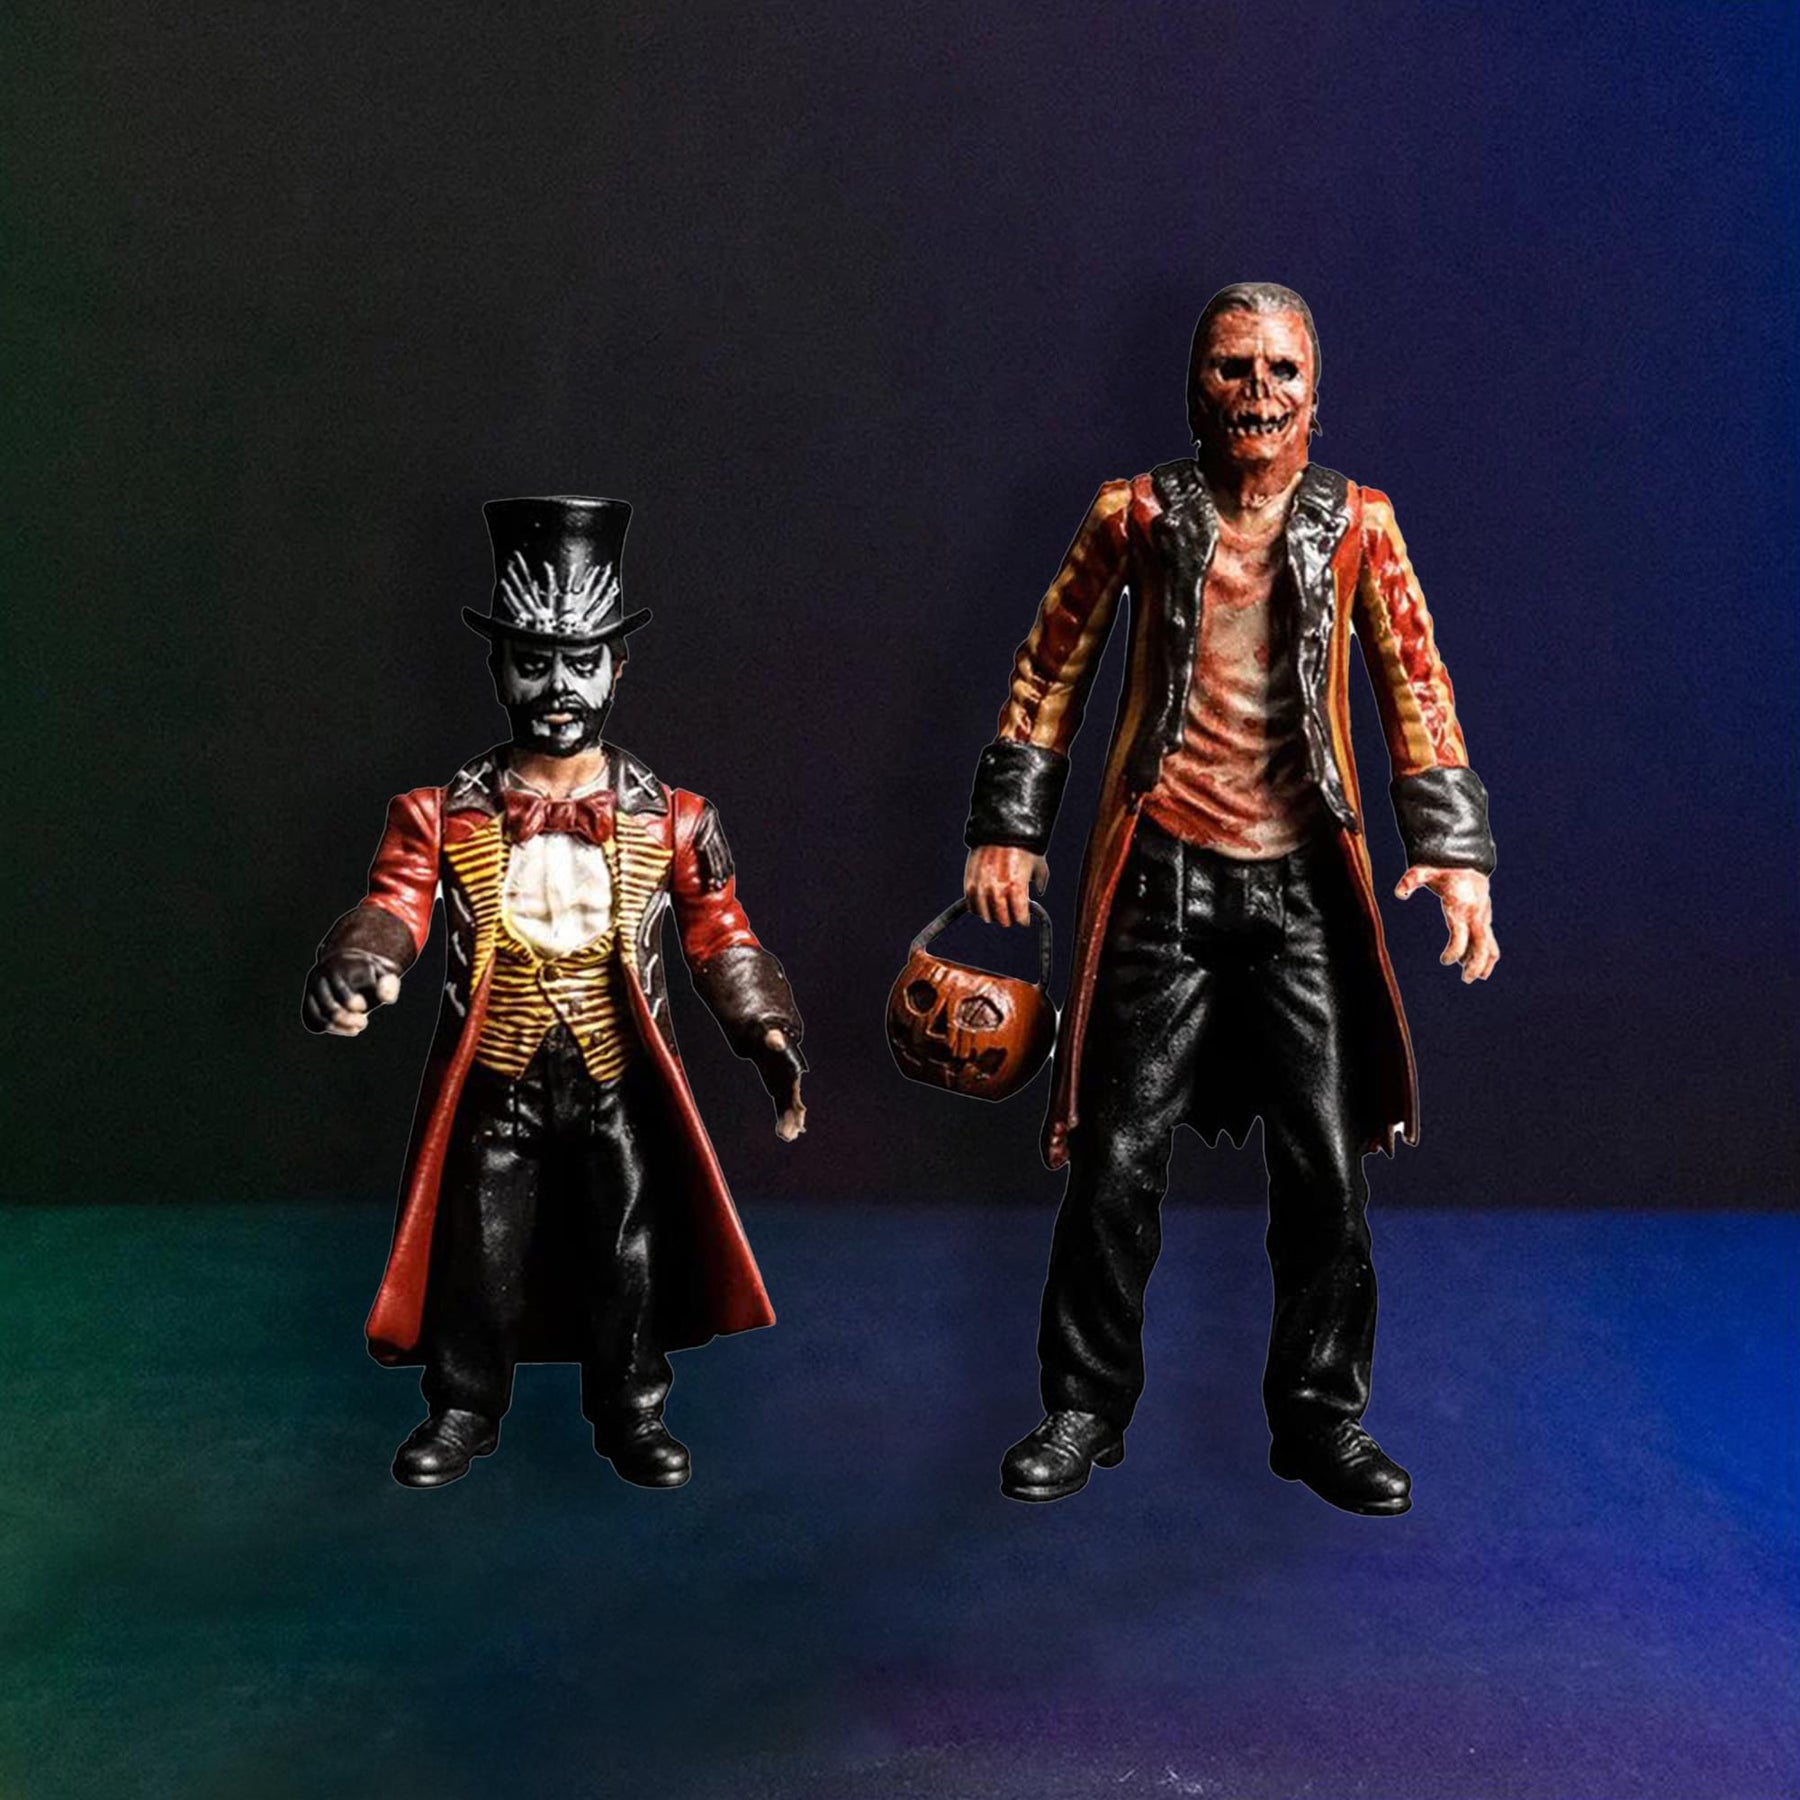 Candy Corn 3.75 Inch Action Figure 2-Pack | Jacob & Dr. Death